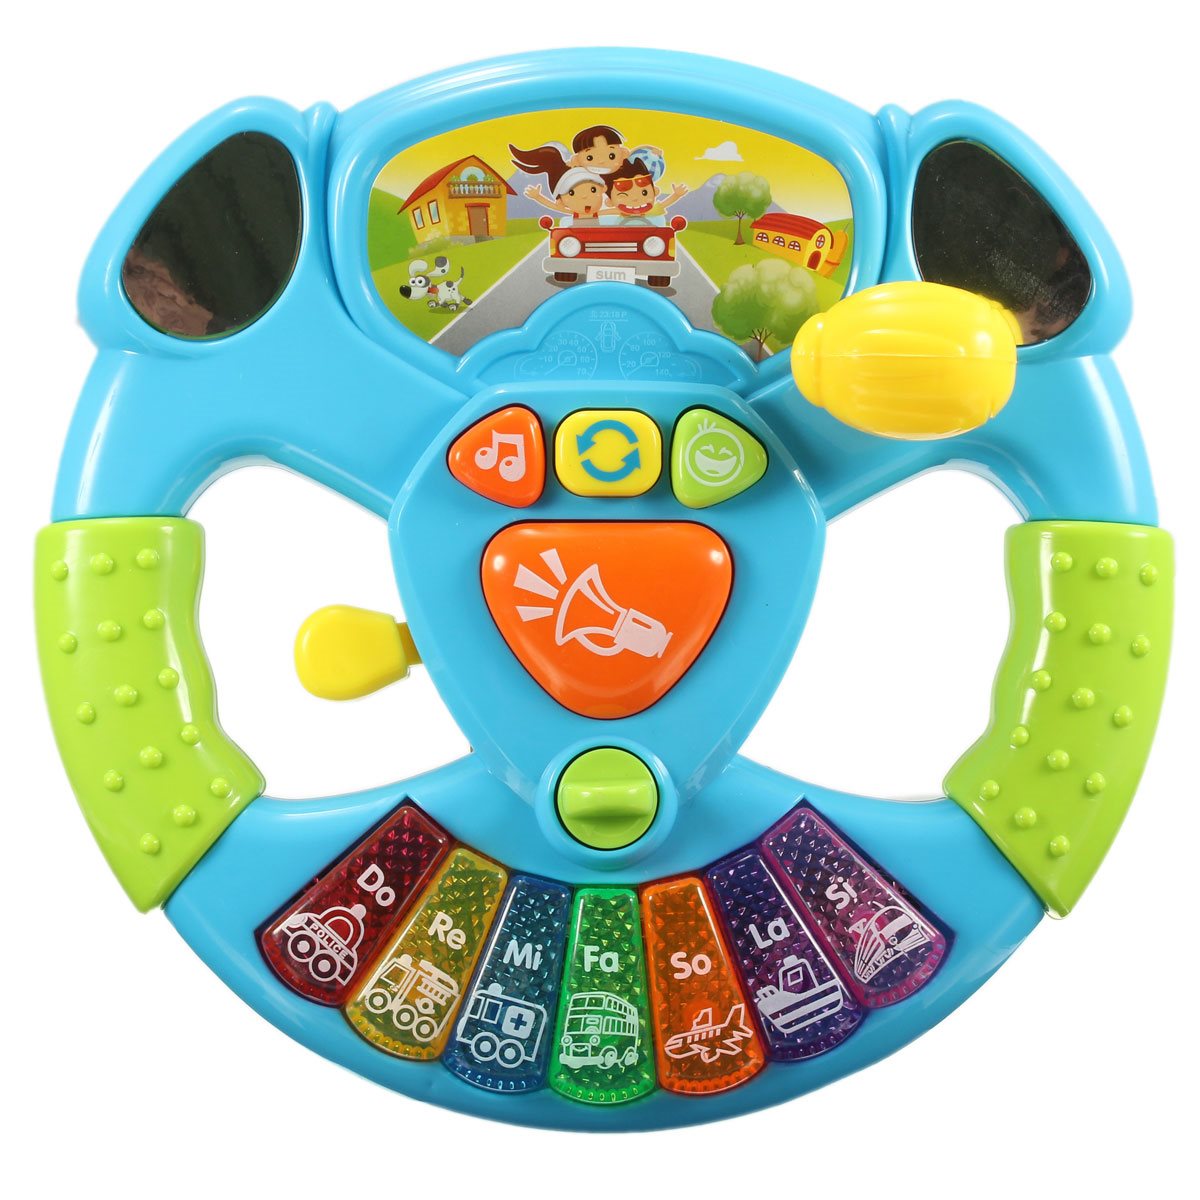 Music-Lights-Education-Intelligence-Toy-Steering-Wheel-Transportation-Tools-Baby-Electronic-Multifunctional-Button-Color-Scales.jpg